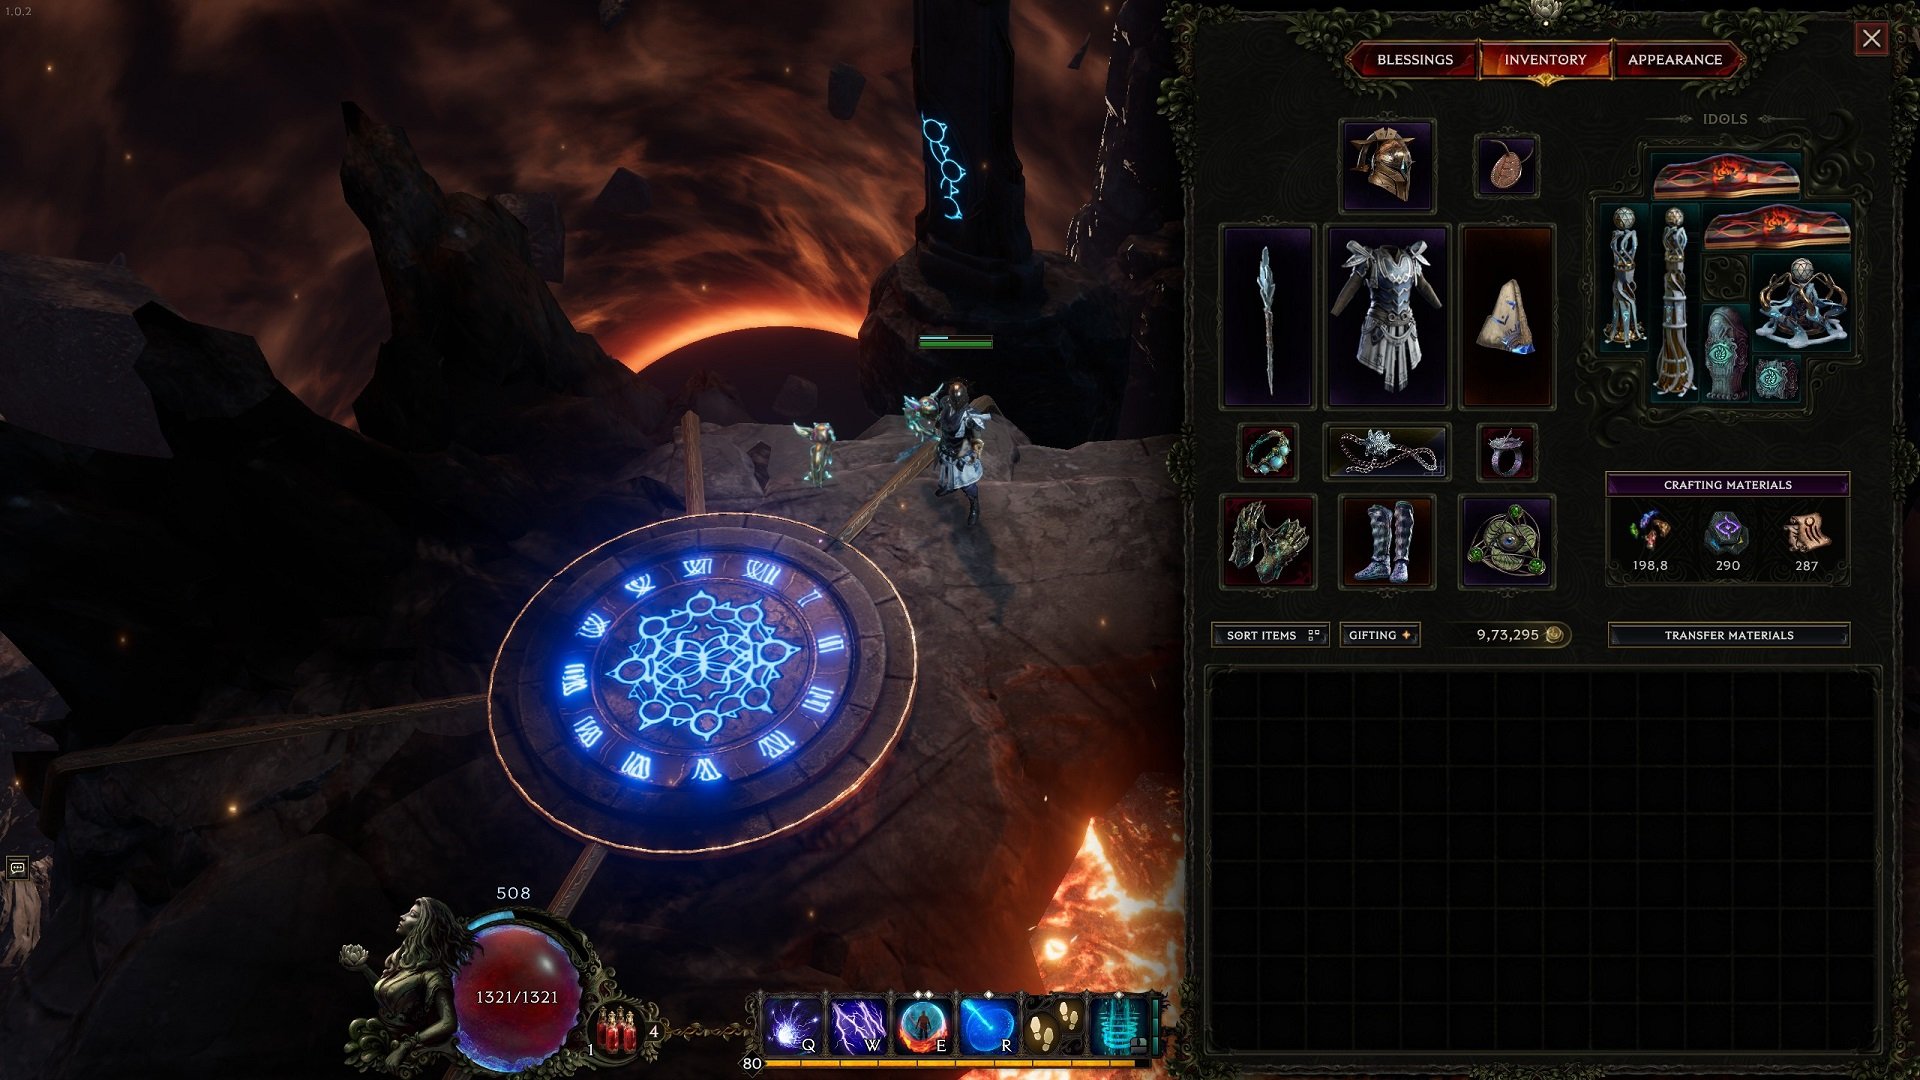 An image of the Mage's gear in Last Epoch.